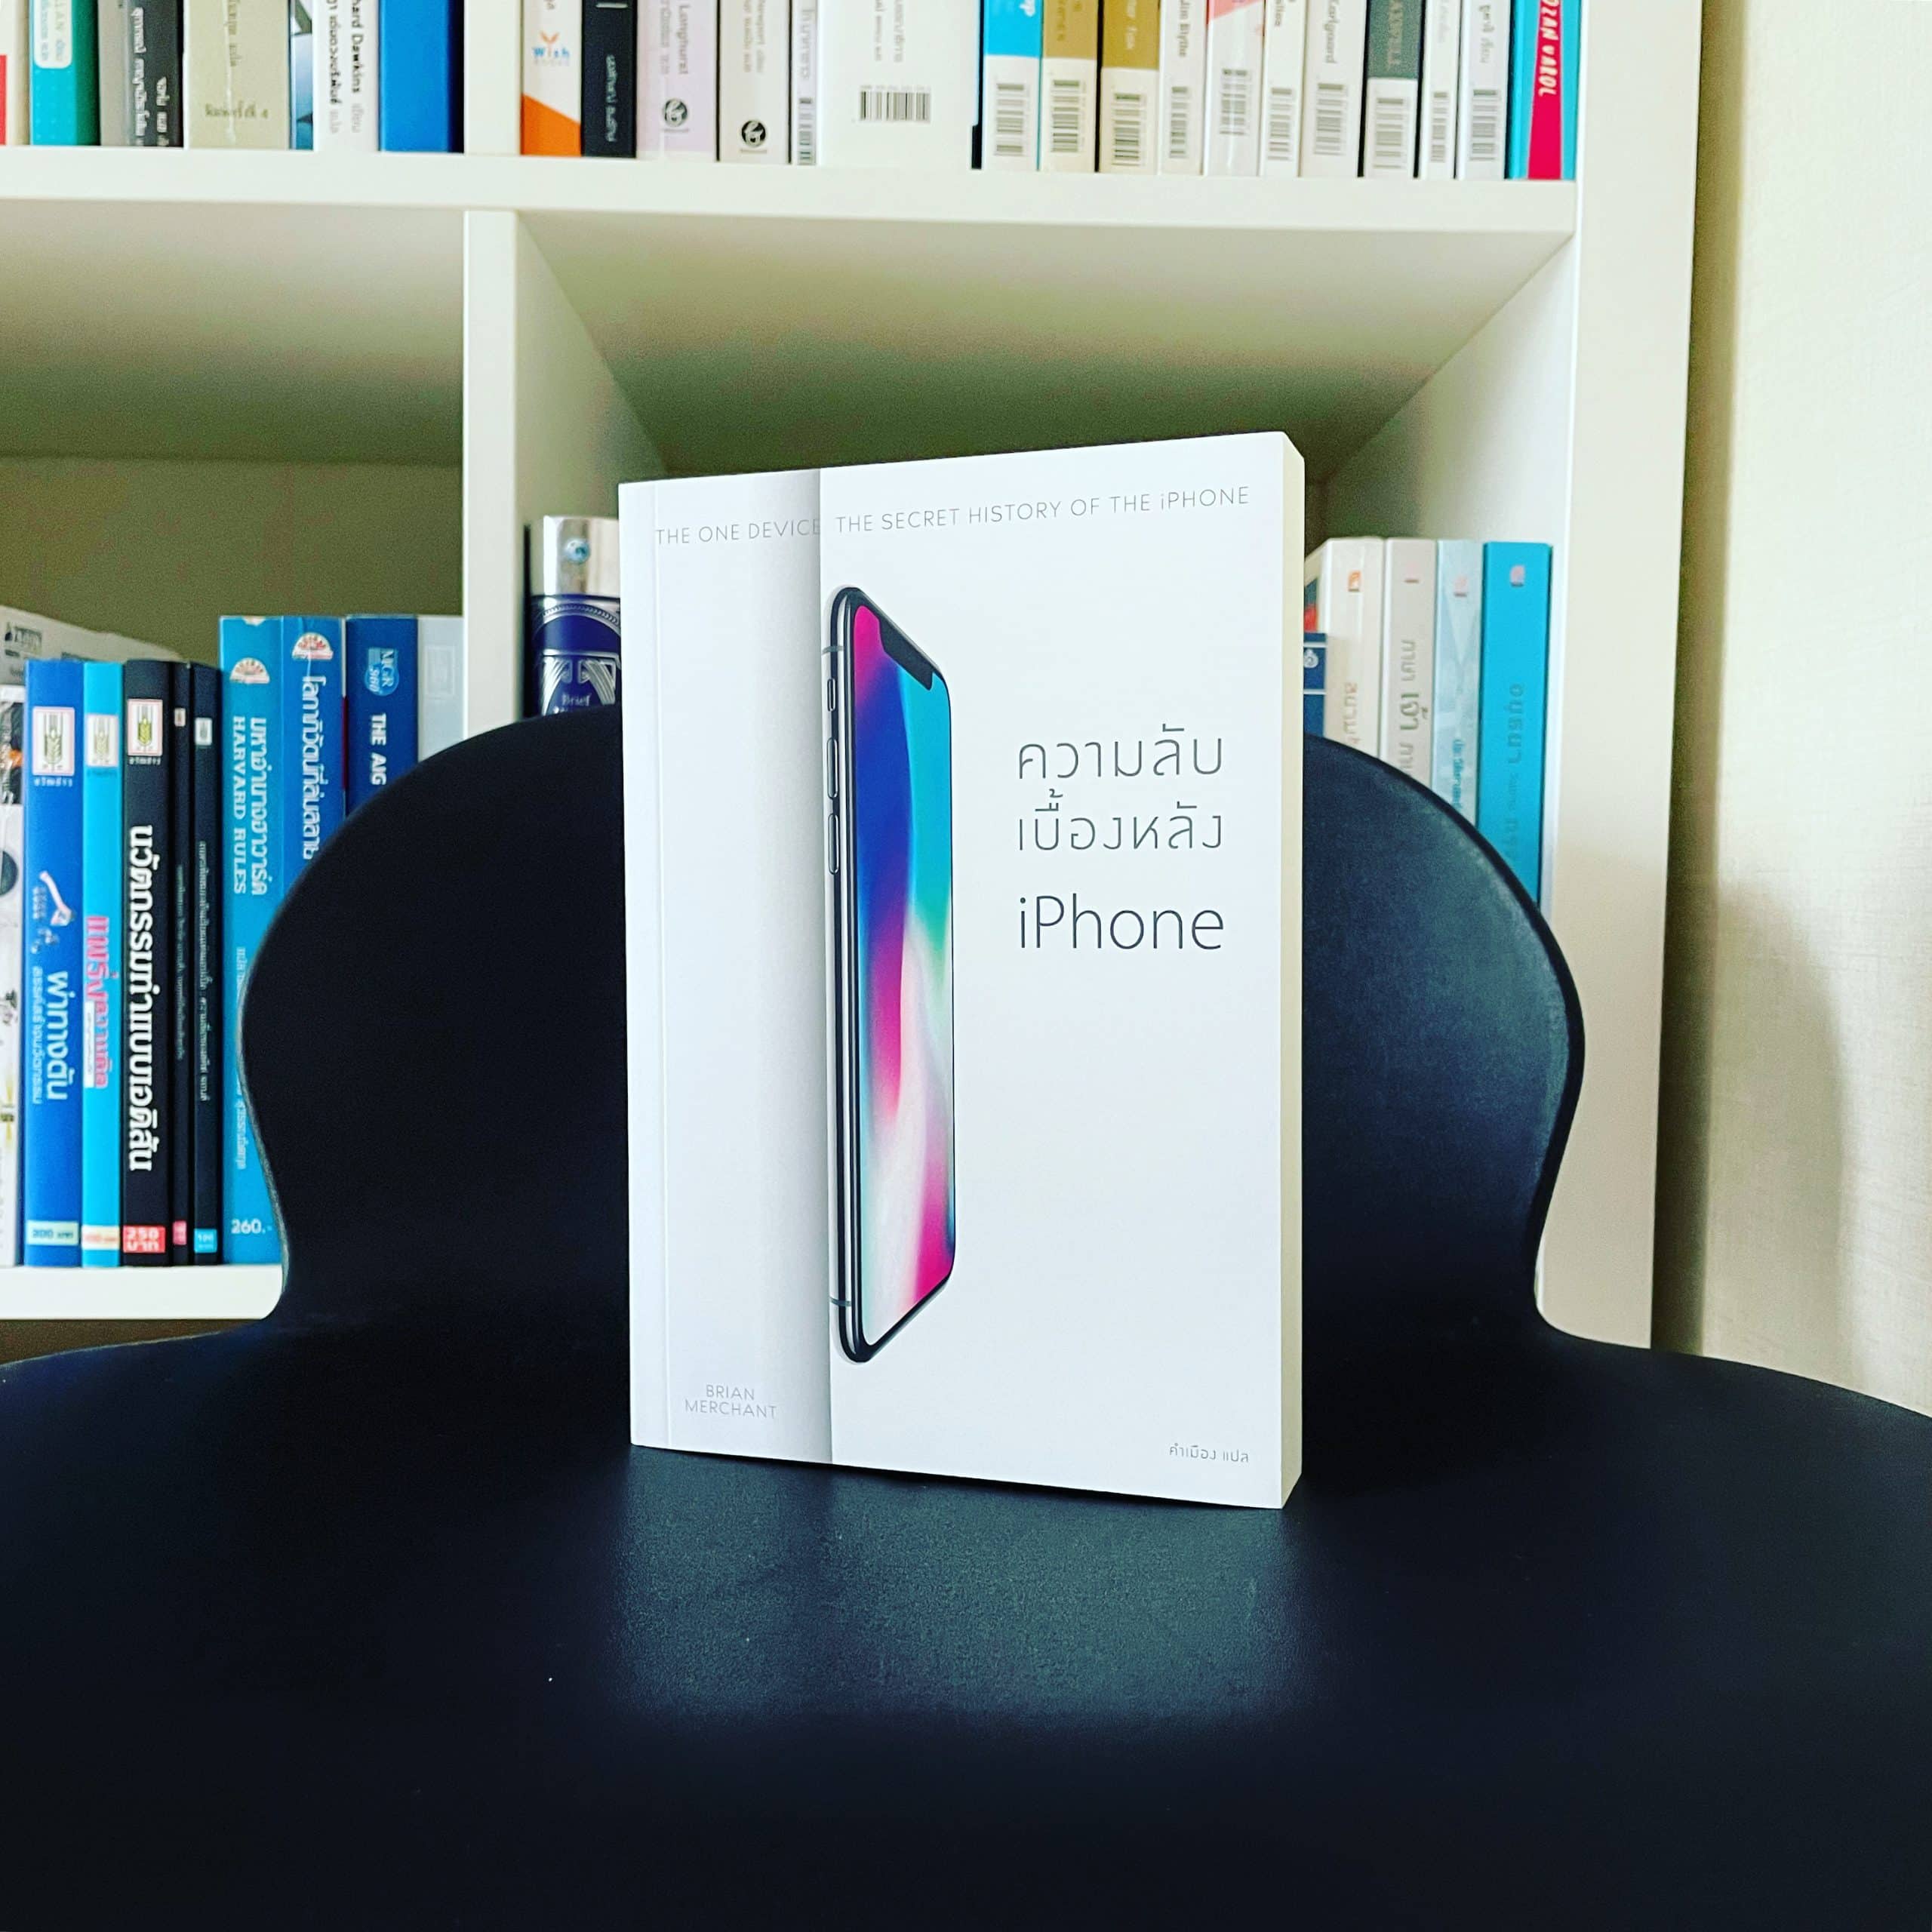 The One Device The Secret History of The iPhone ความลับเบื้องหลัง iPhone